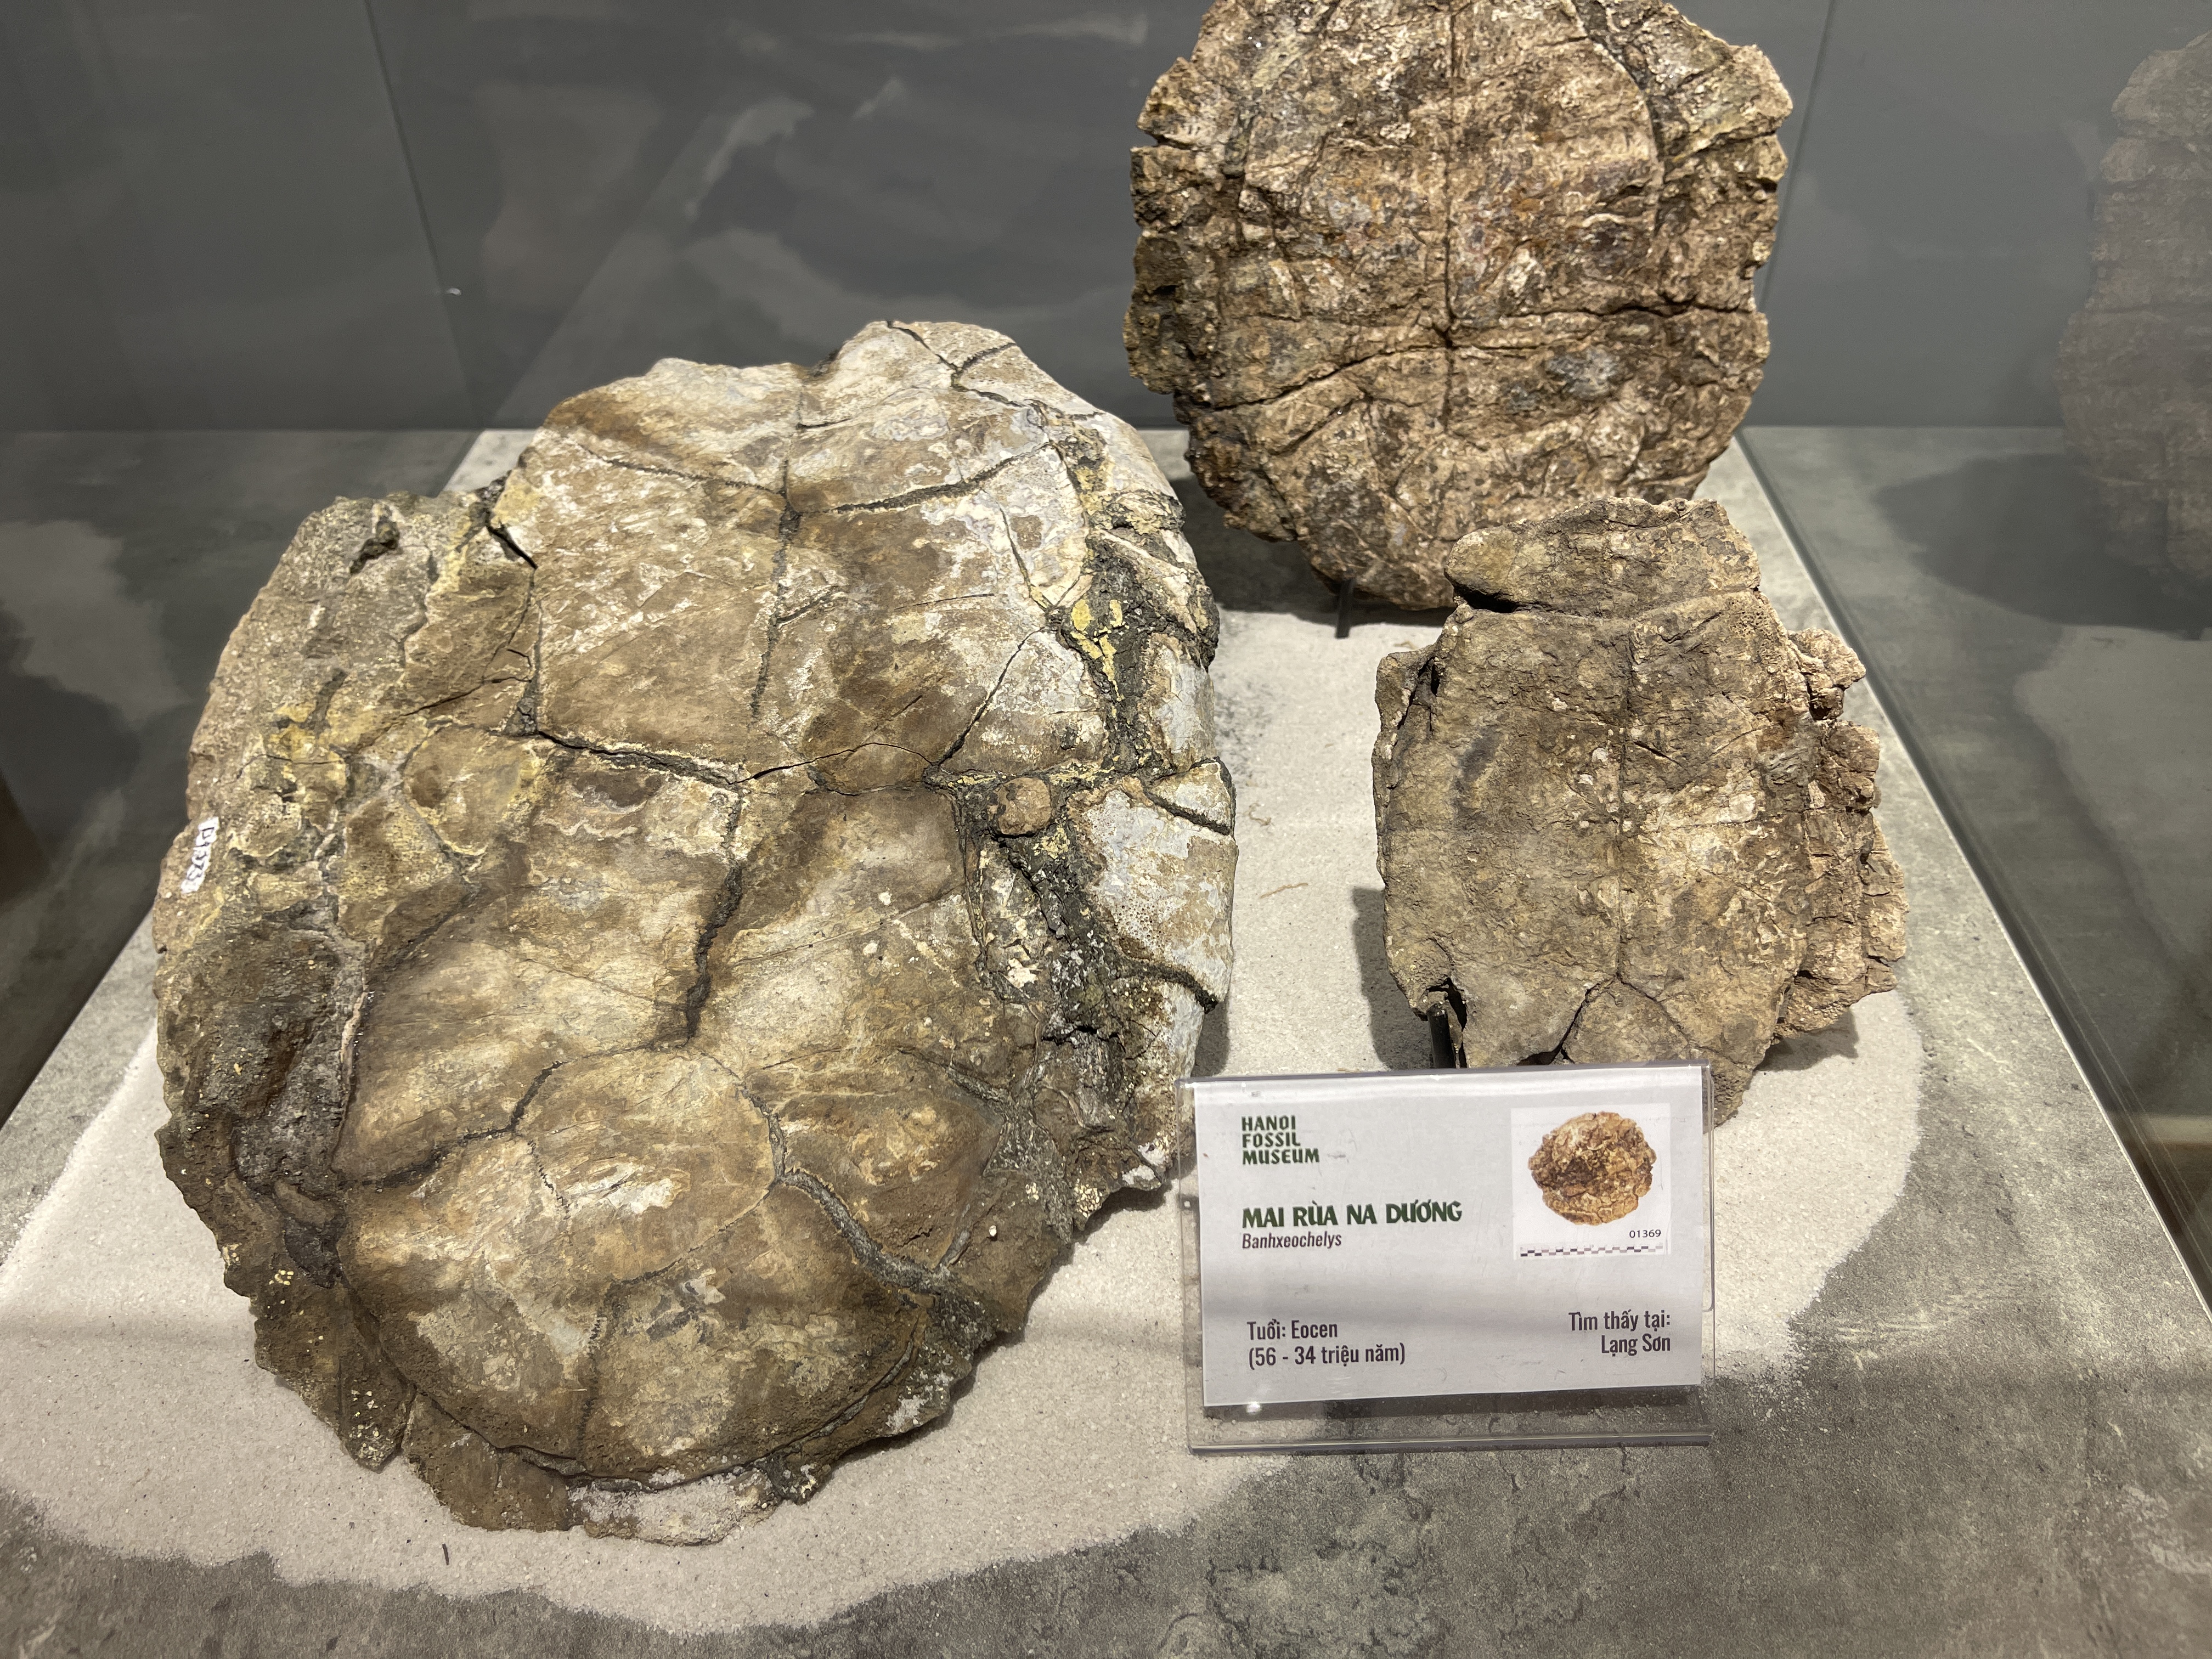 An Eocene era Banhxeochelys found in the northern province of Lang Son on show at the venue. Photo: Dong Nguyen / Tuoi Tre News